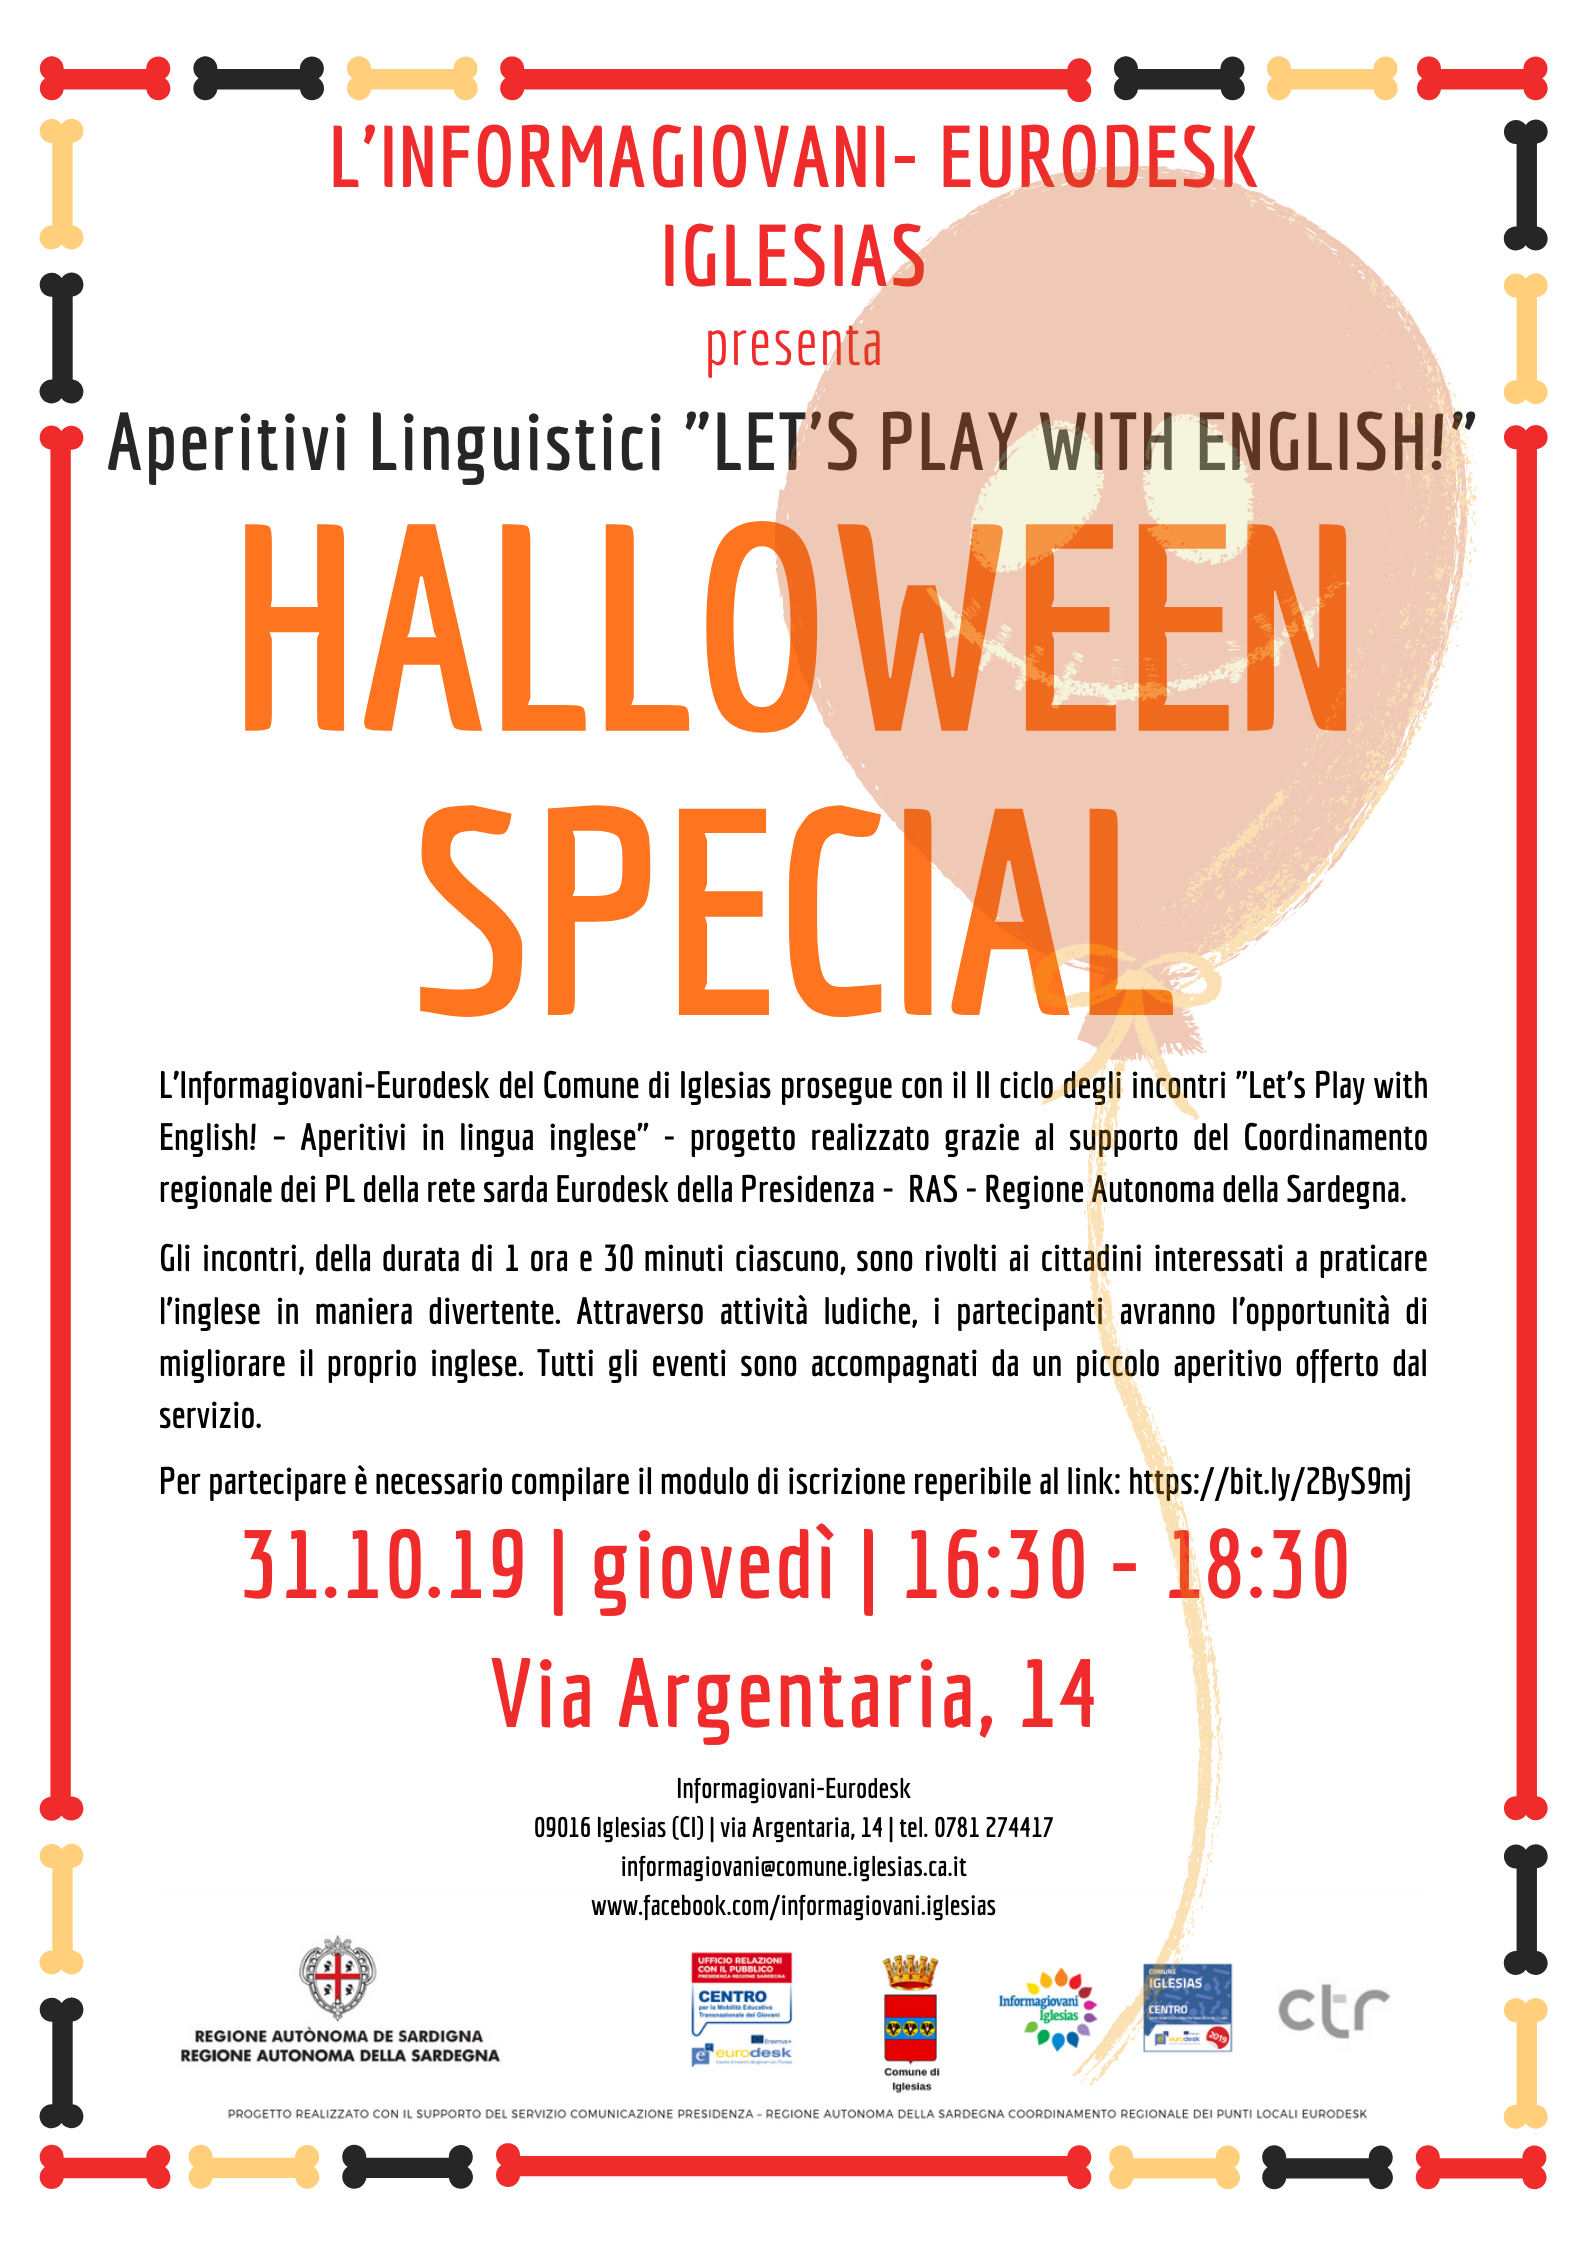 Aperitivi Linguistici “LET’S PLAY WITH ENGLISH!” – HALLOWEEN SPECIAL